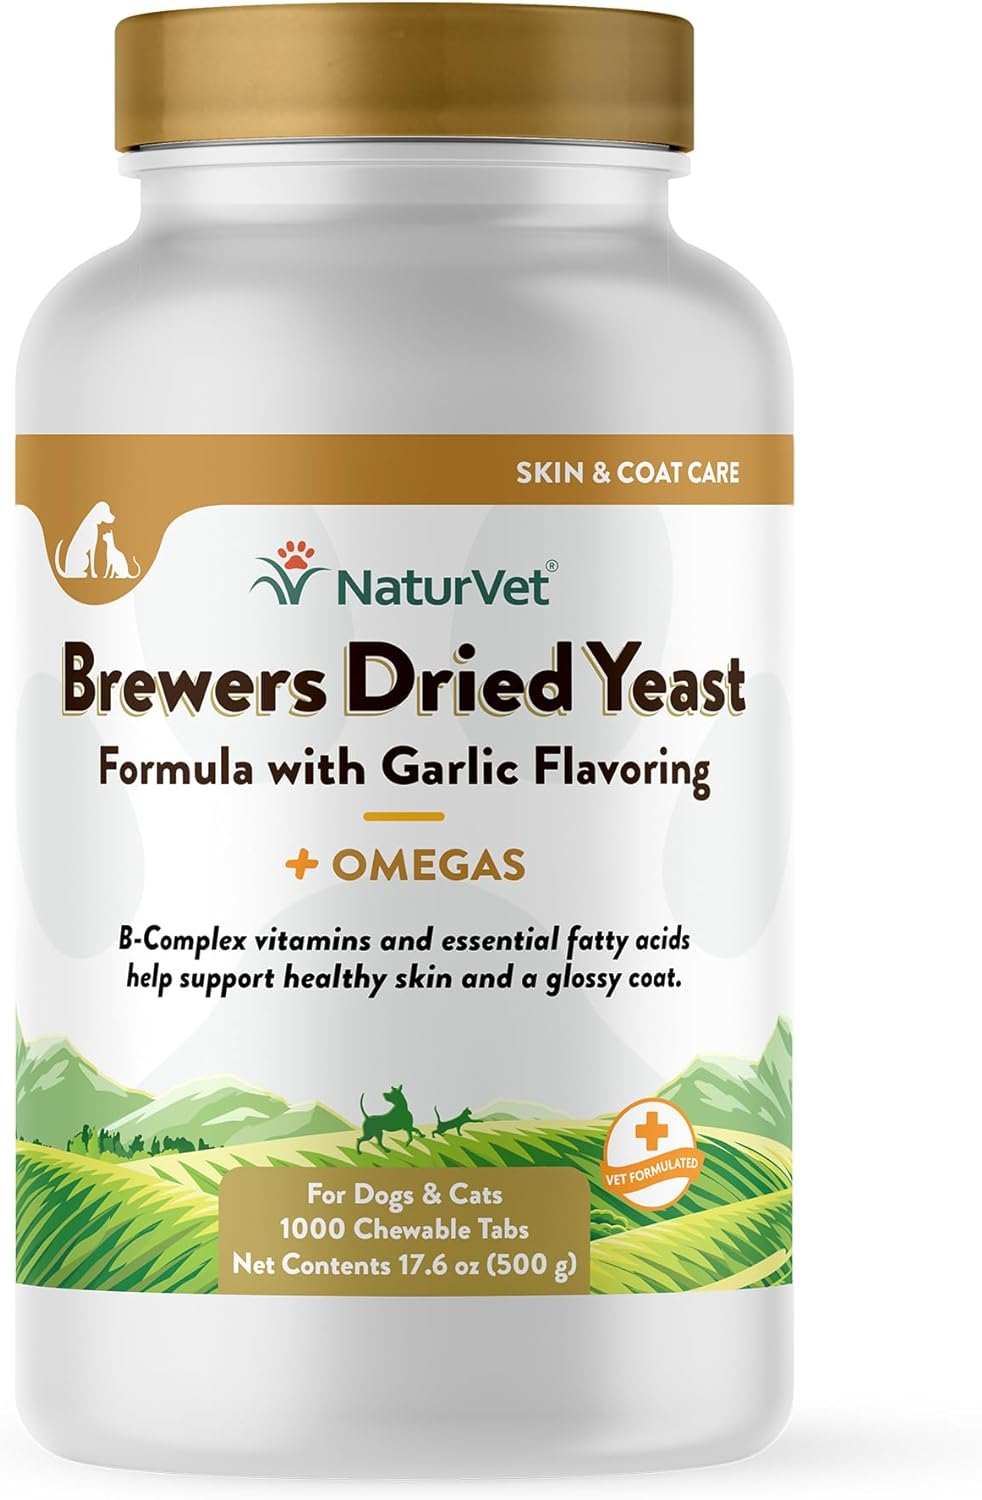 NaturVet – Brewer’s Dried Yeast Formula with Garlic Flavoring – Plus Omegas | Rich in Omega-3, 6 & 9 Fatty Acids | Fortified with B1, B2, Niacin & Vitamin C | for Dogs & Cats | 1000 Chewable Tablets